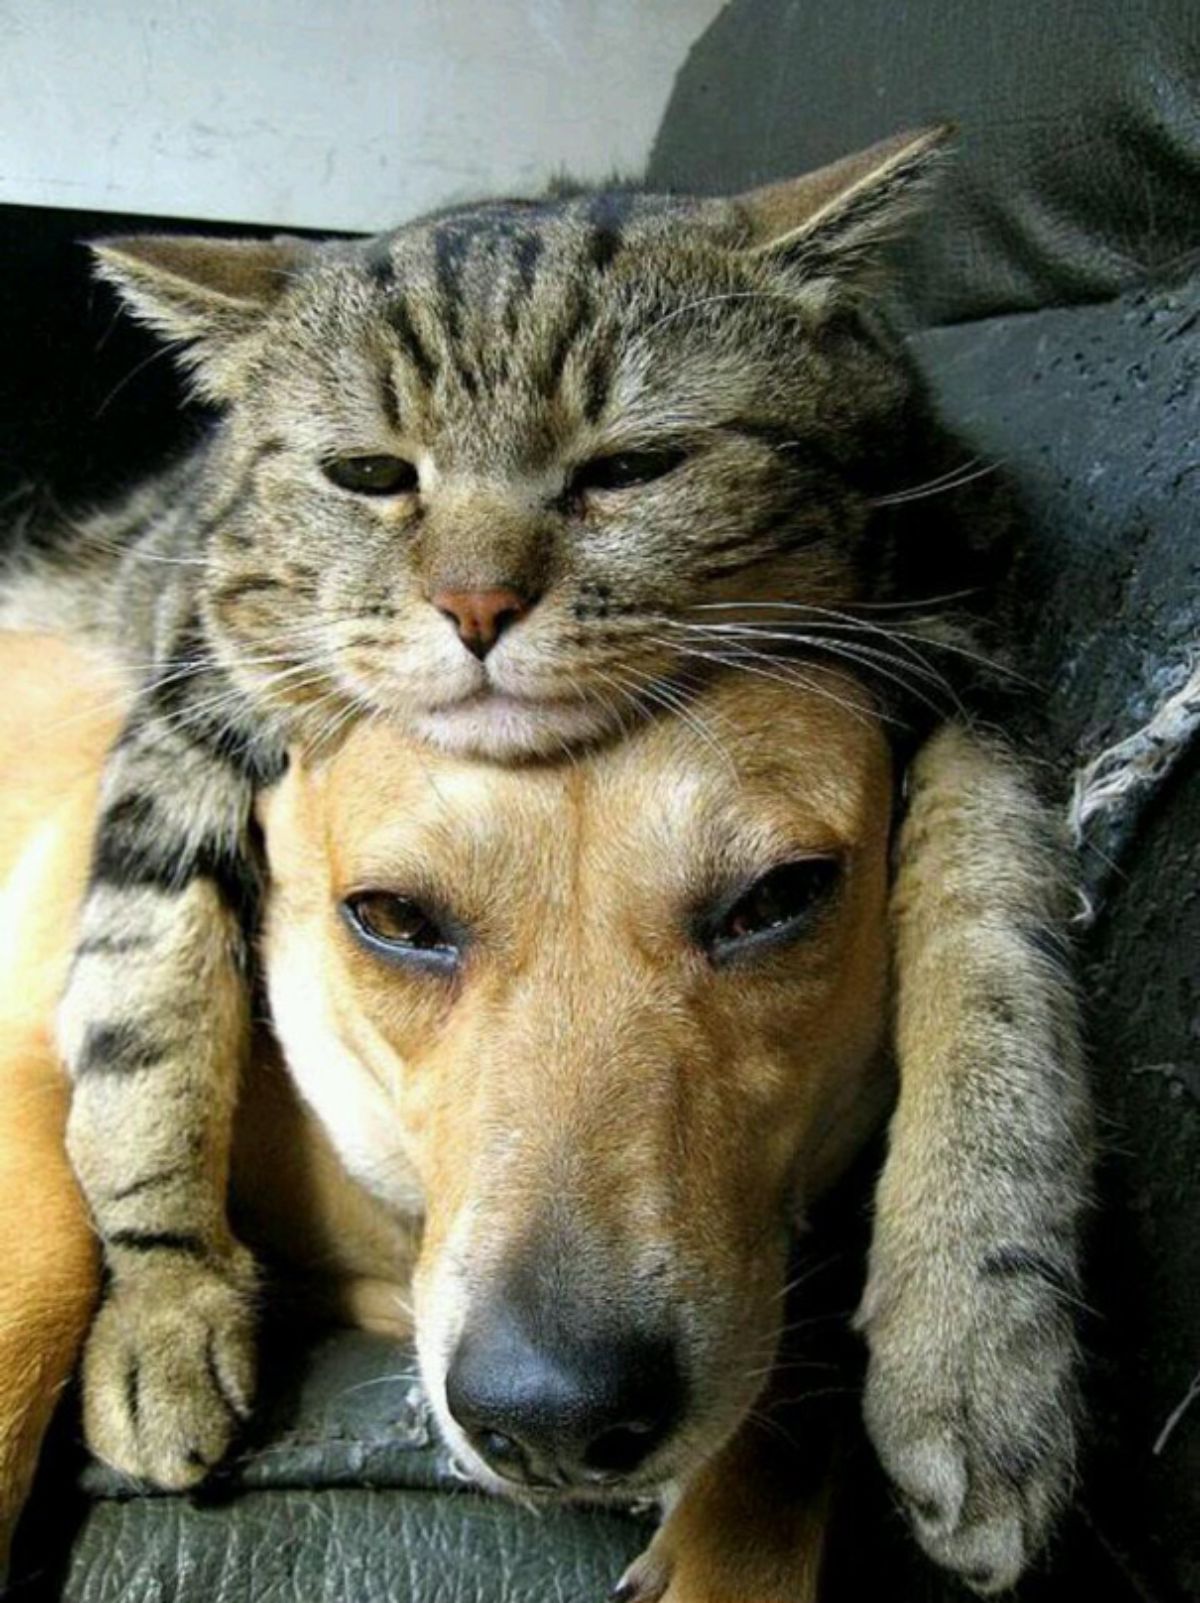 grey tabby cat laying on a brown dog's head like a hat